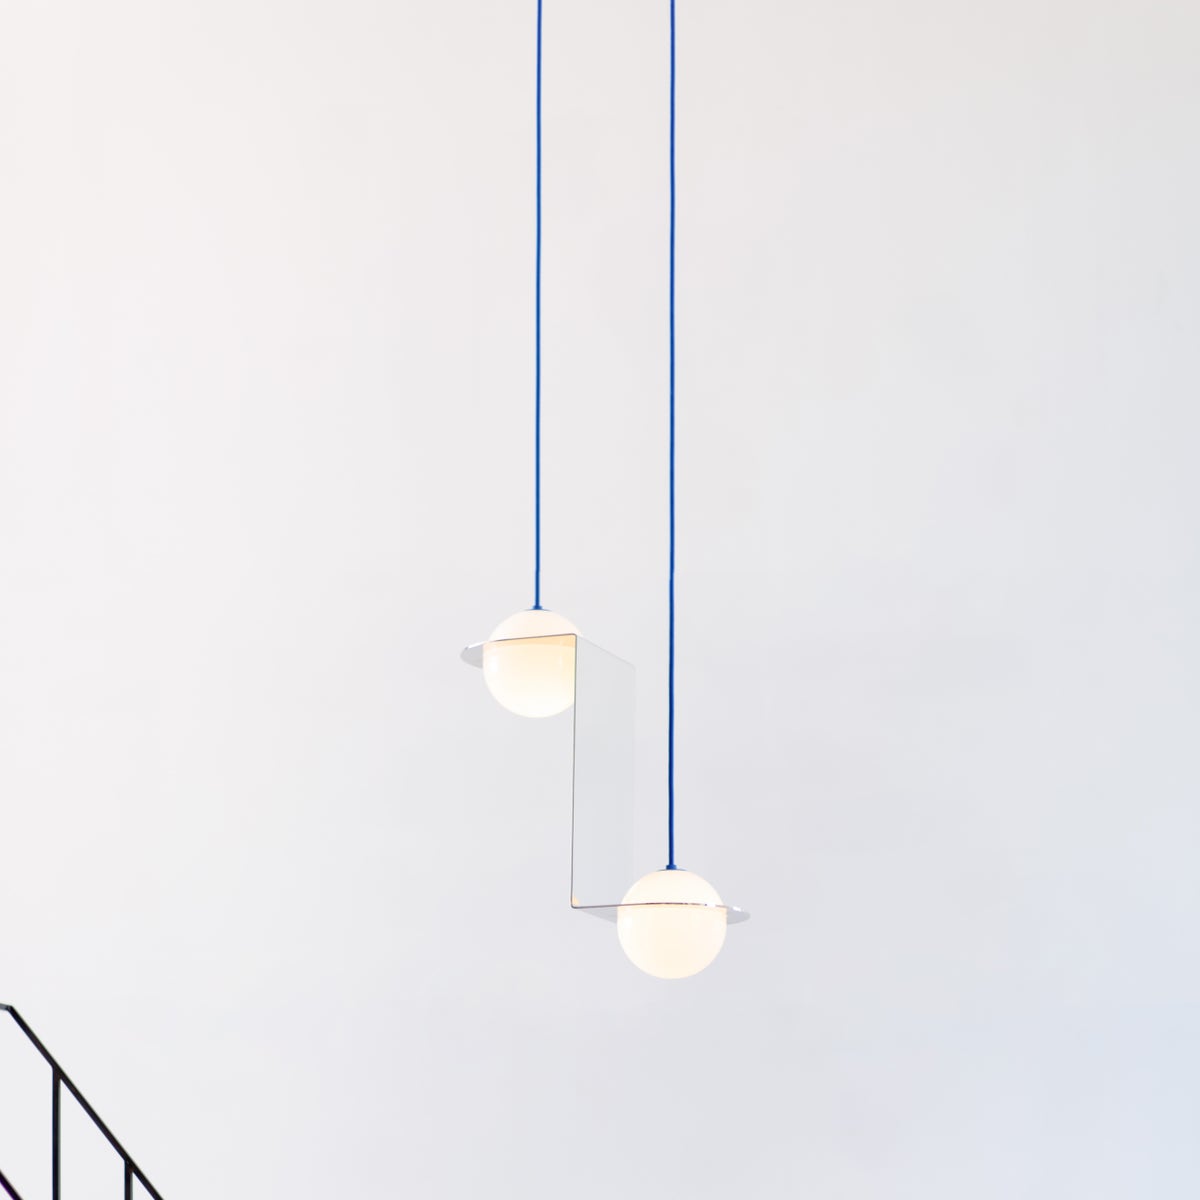 Two spherical lights hanging from blue cord against a white background